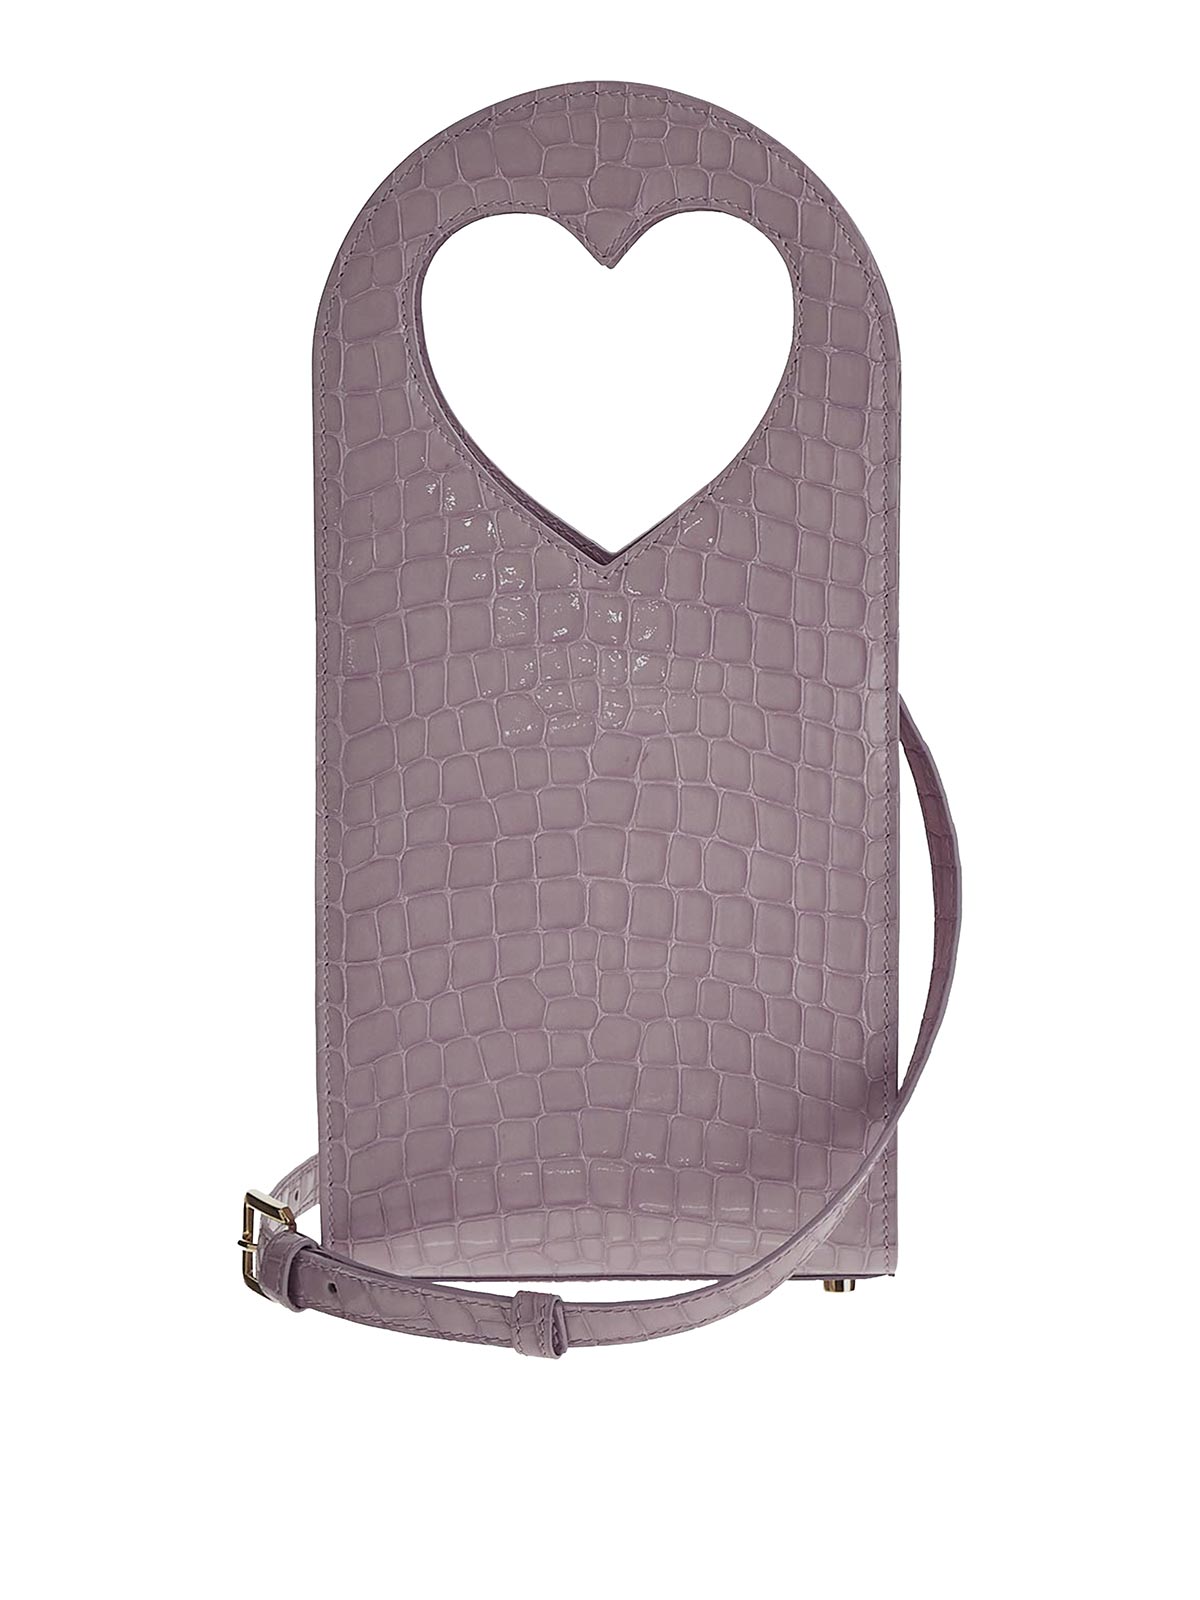 Marco Rambaldi Lilac Bag With Heart-shaped Top Handles In Black